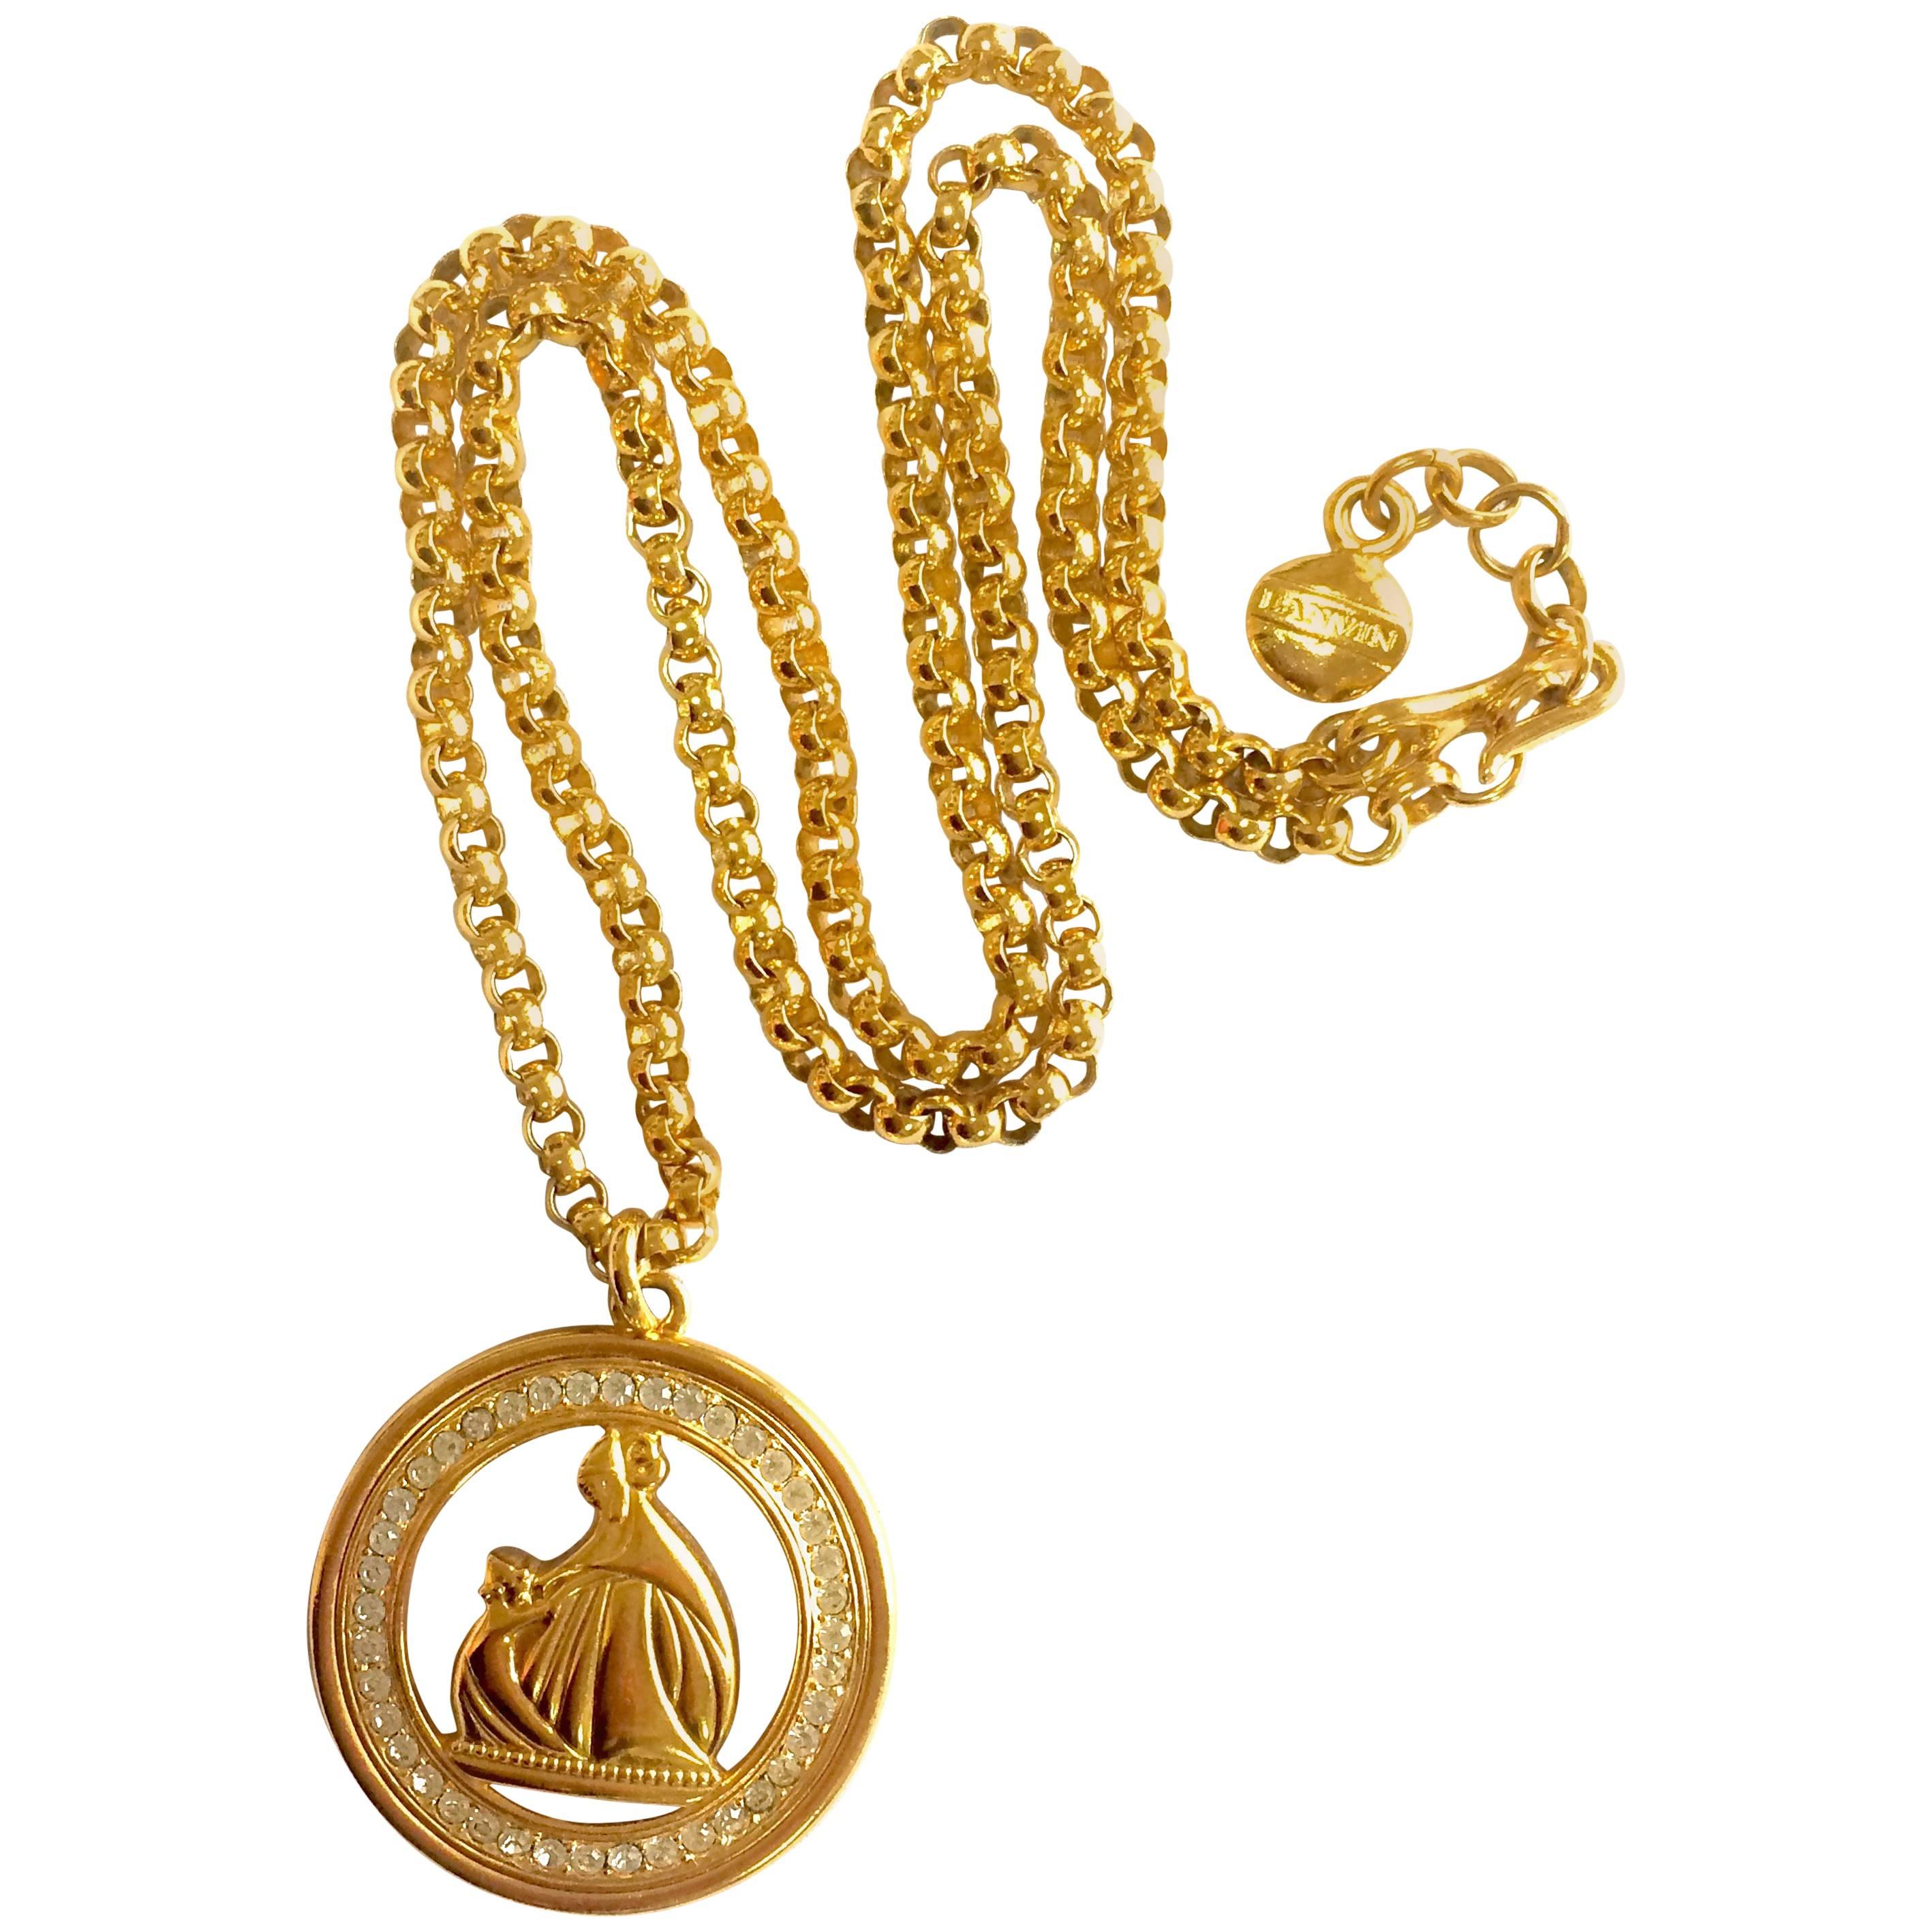 MINT. Vintage LANVIN golden chain necklace with large logo pendant top. Germany.